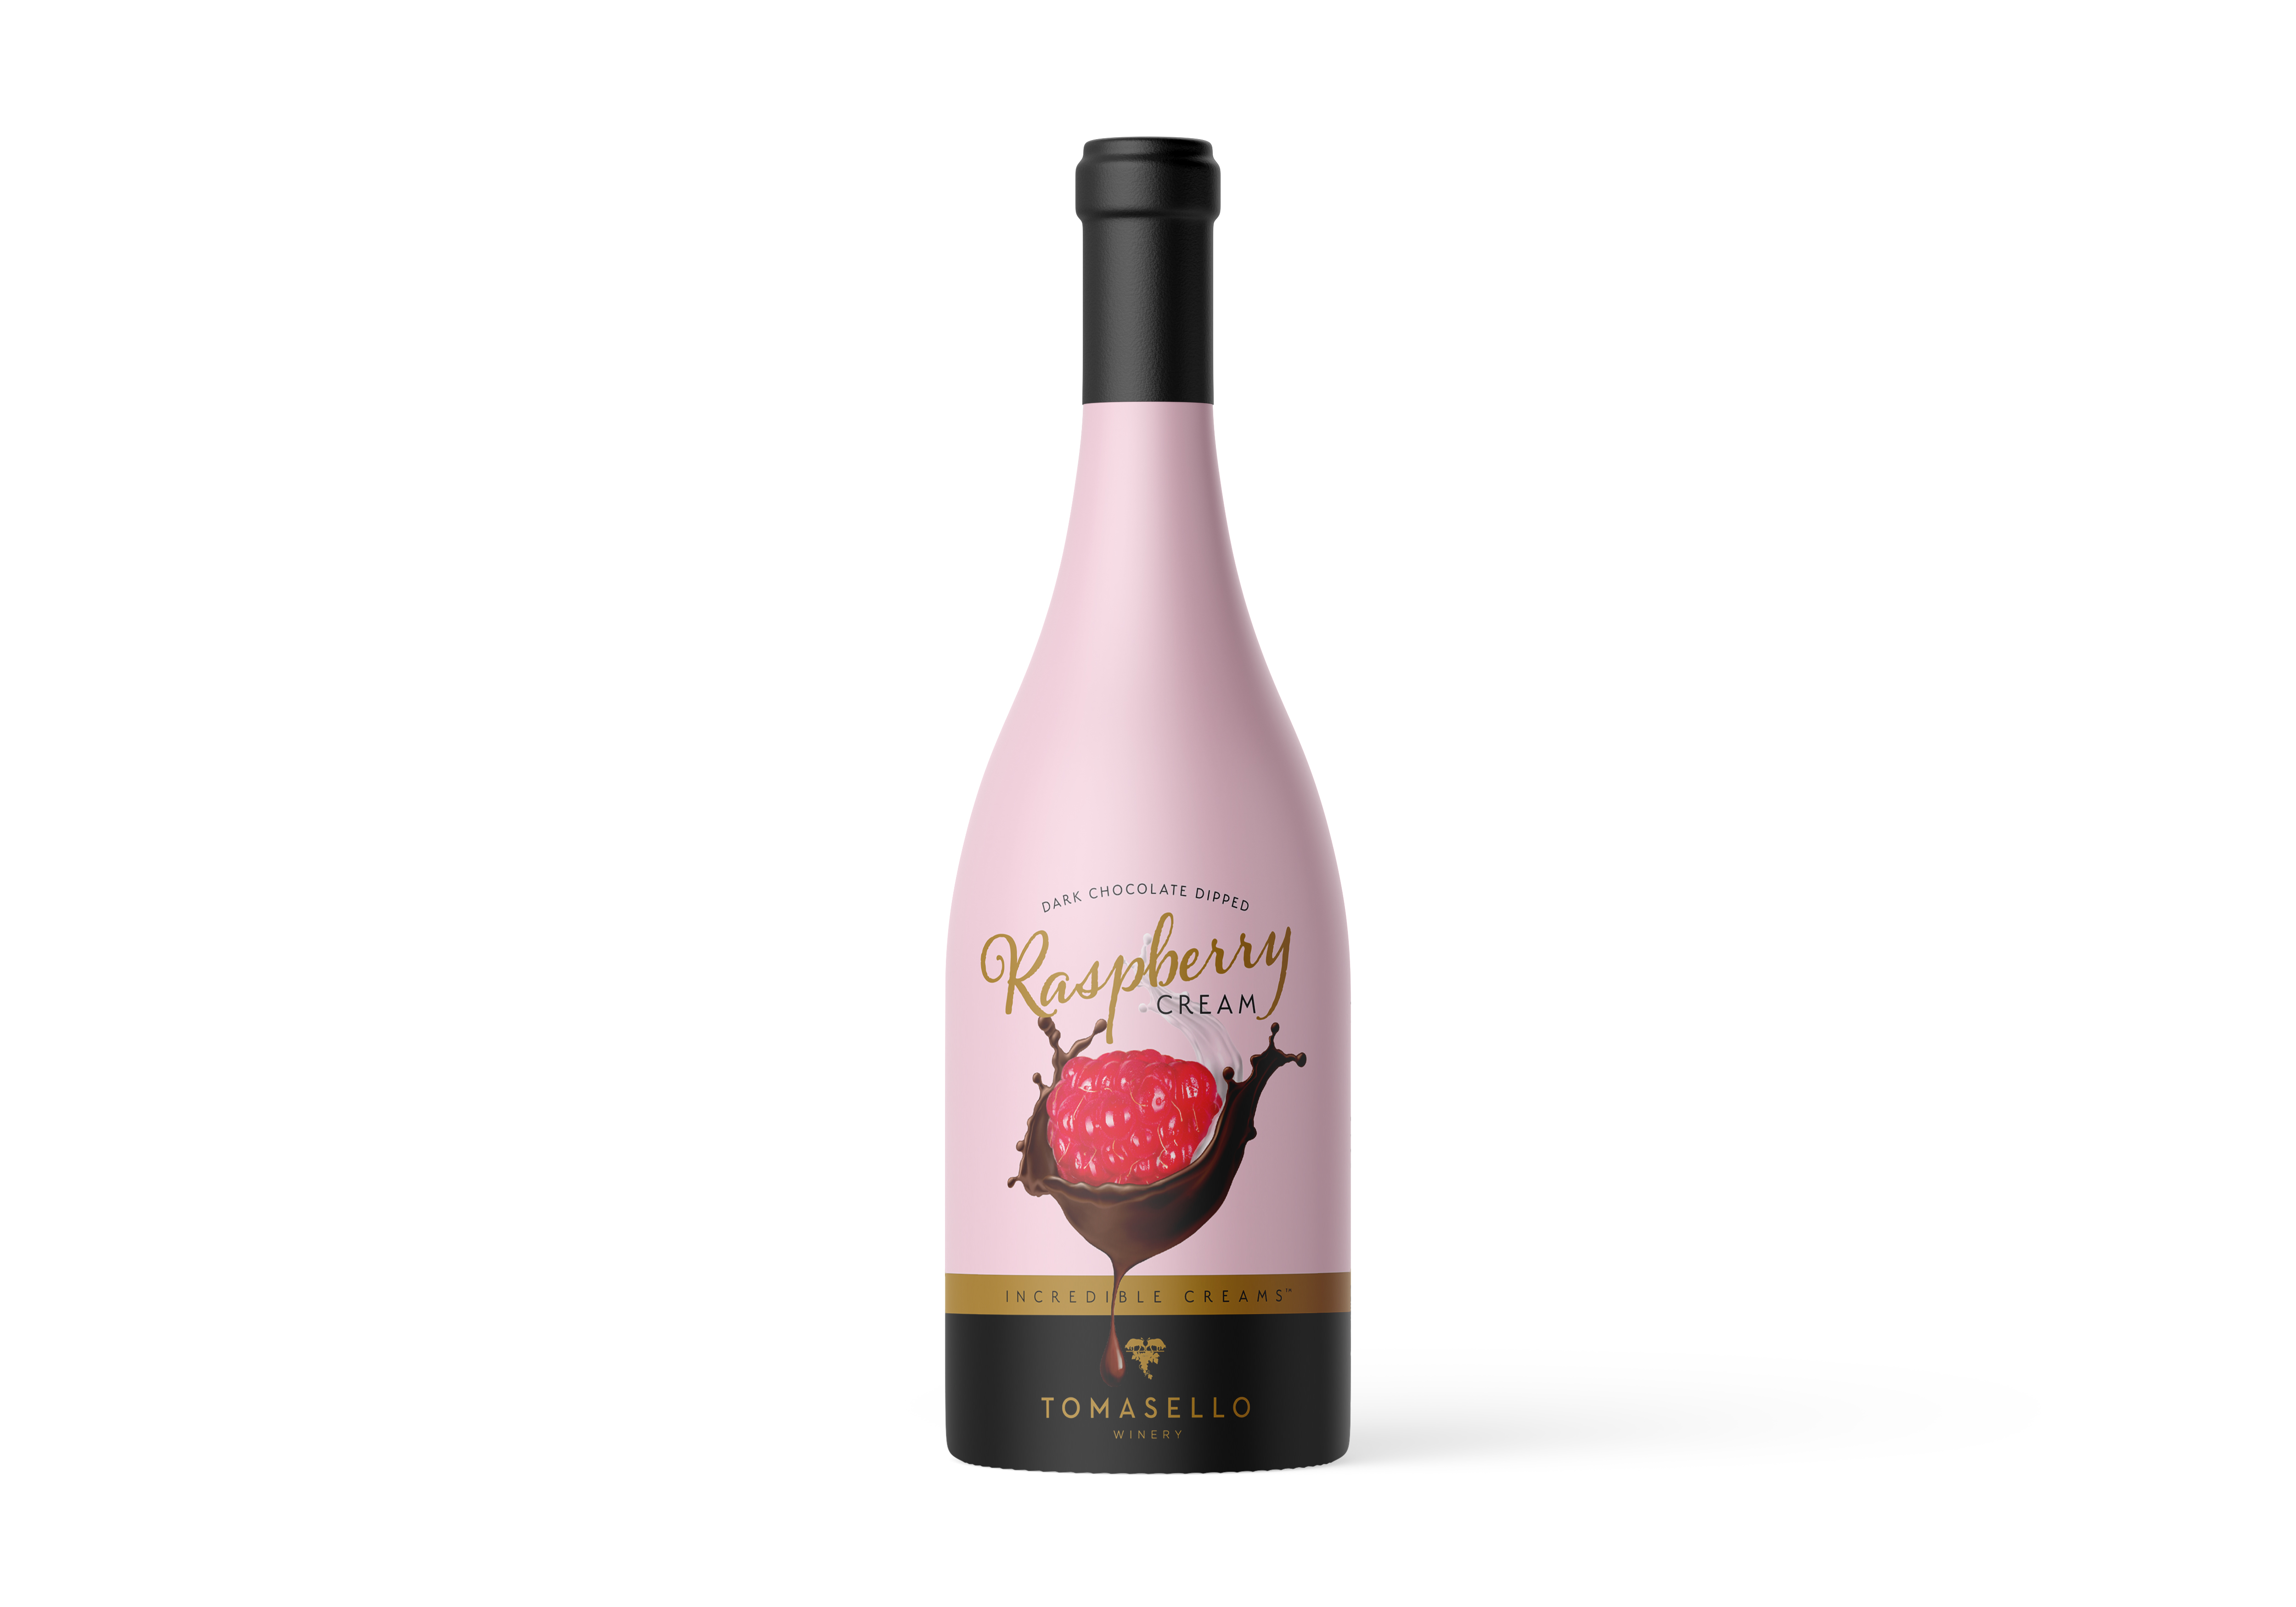 Product Image for Tomasello Dark Chocolate Dipped Raspberry Cream - INCREDIBLE CREAMS Limited Release